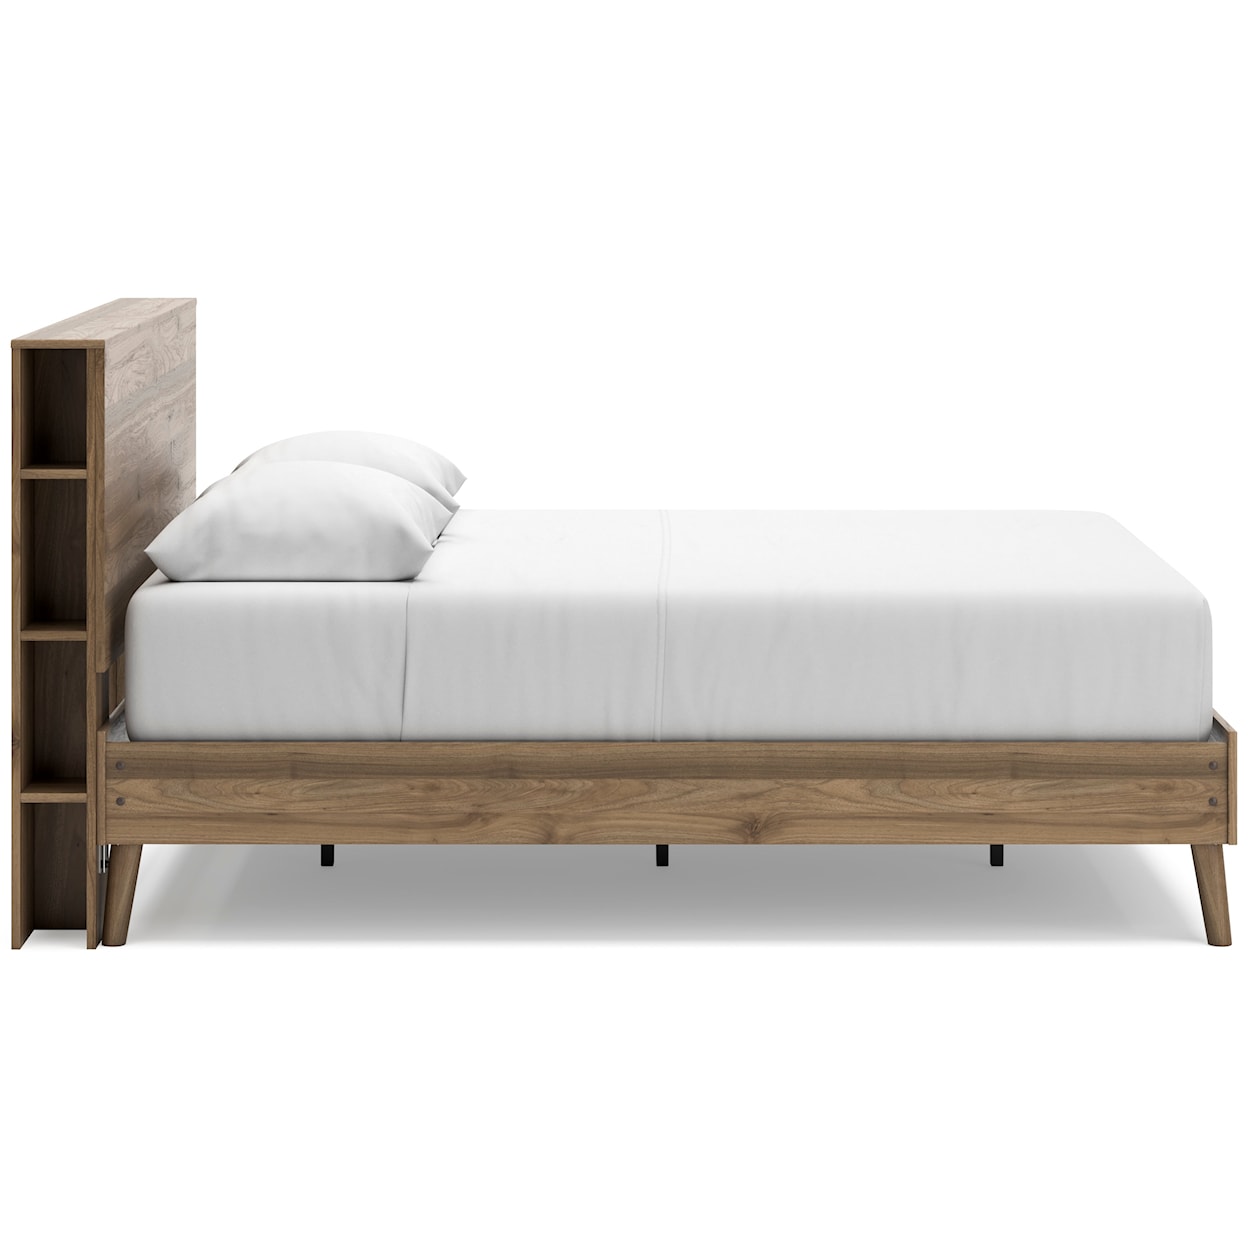 Signature Design by Ashley Furniture Aprilyn Queen Bookcase Bed